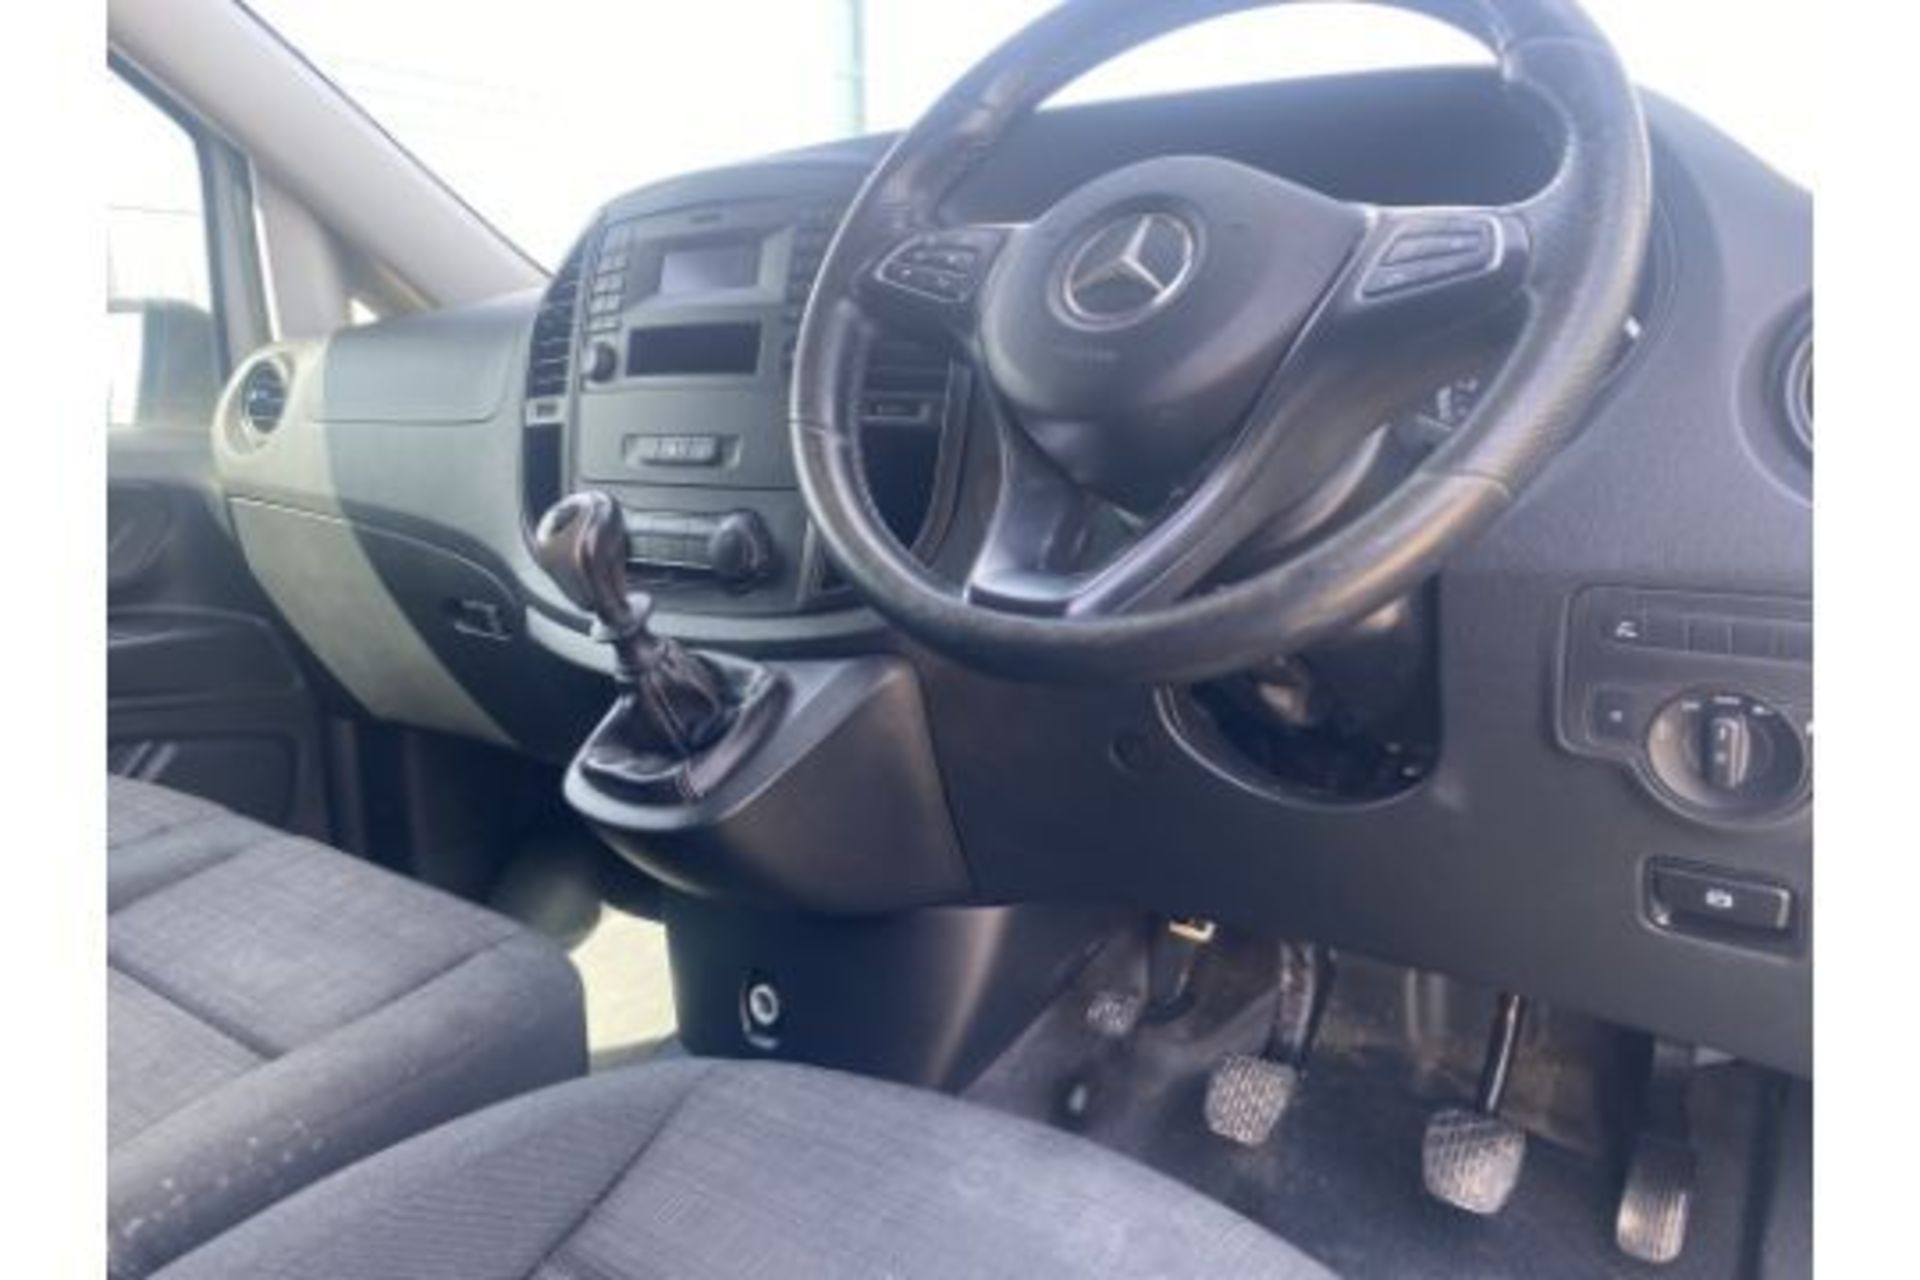 MERCEDES VITO 110CDI PURE "LWB" 20 REG - 1 OWNER - ONLY 71K MILES - EURO 6 - LOOK! - Image 3 of 10